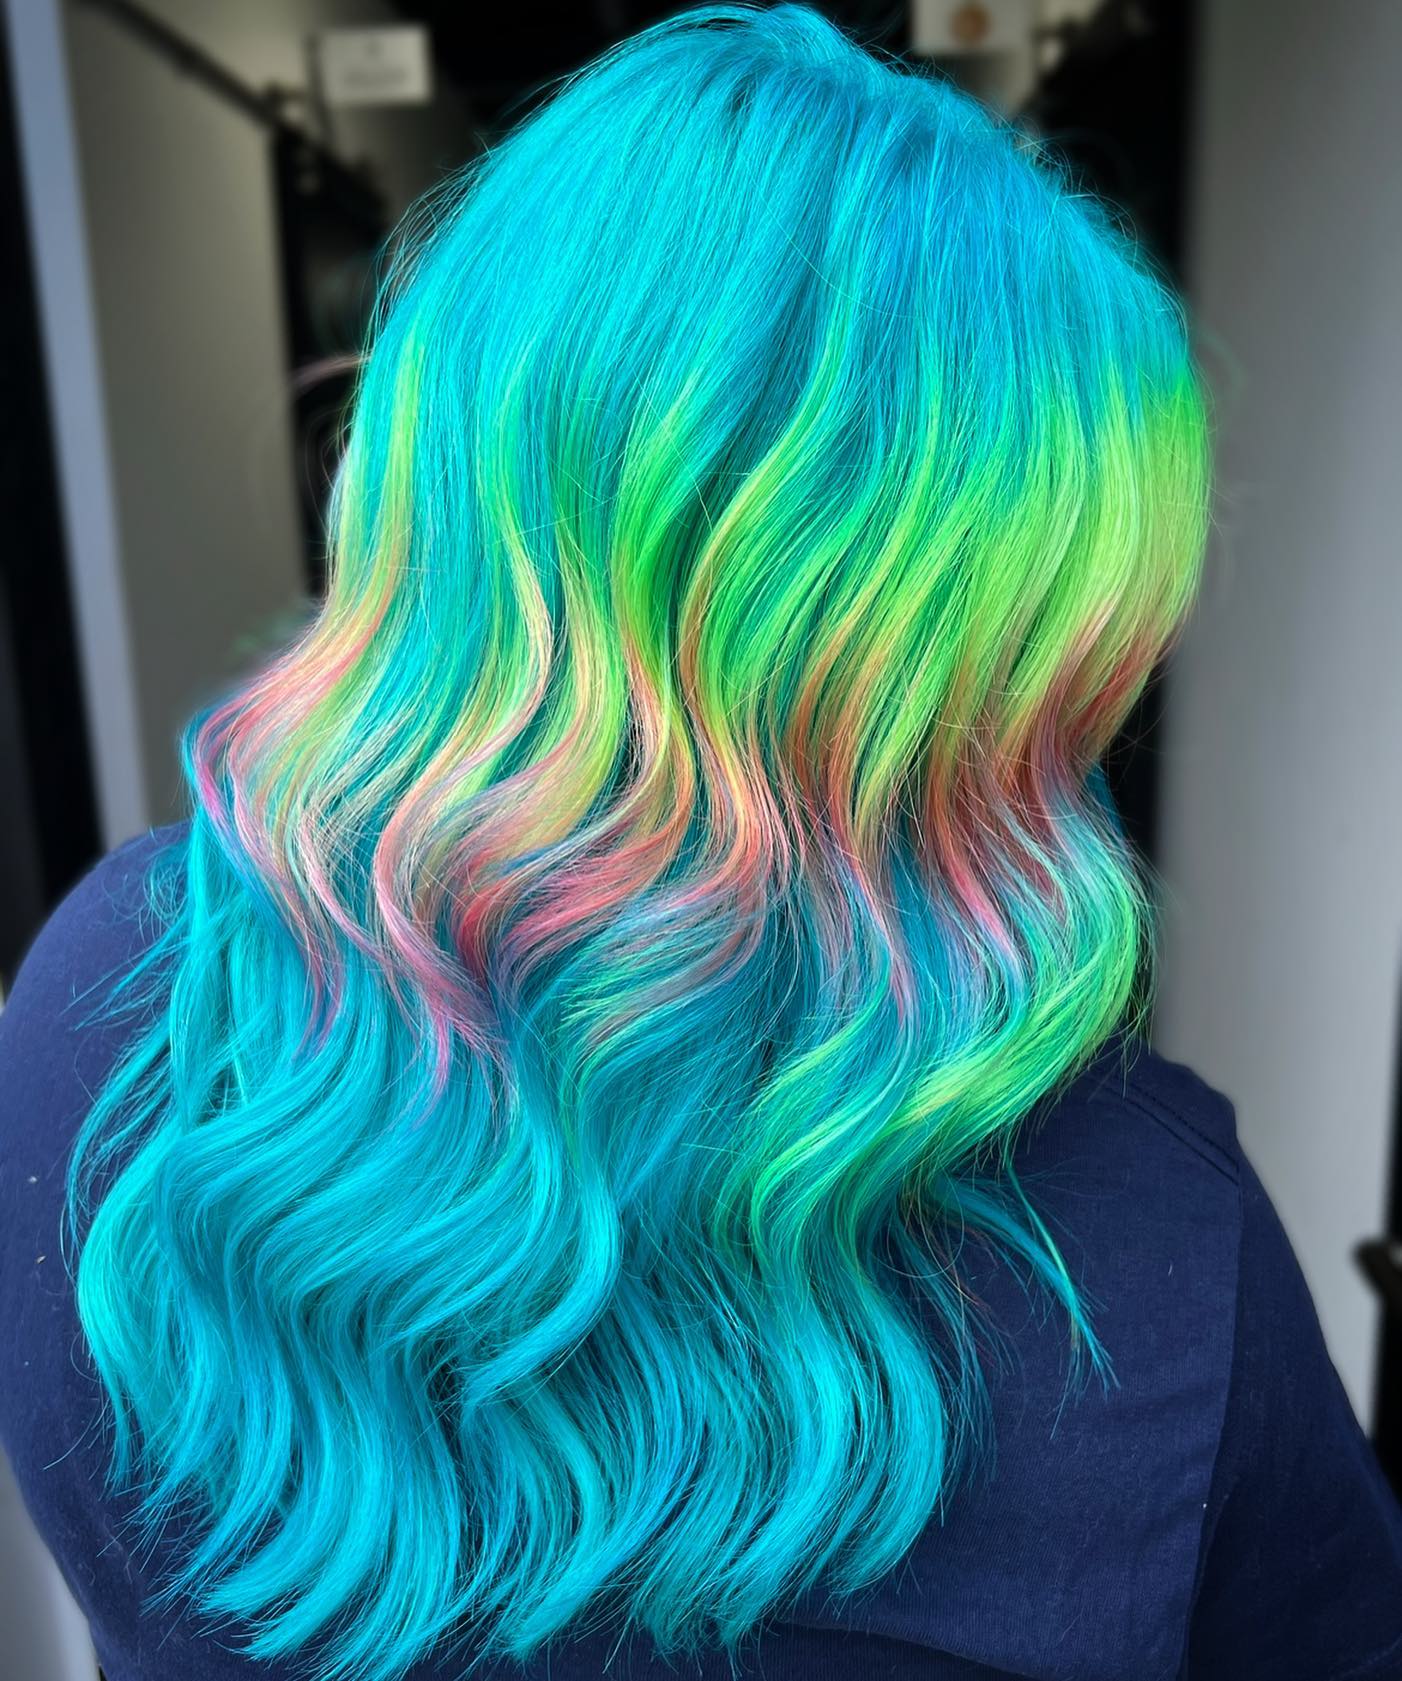 22 Cool Turquoise Hair Ideas for a Bold and Vibrant Look - Hairstyle